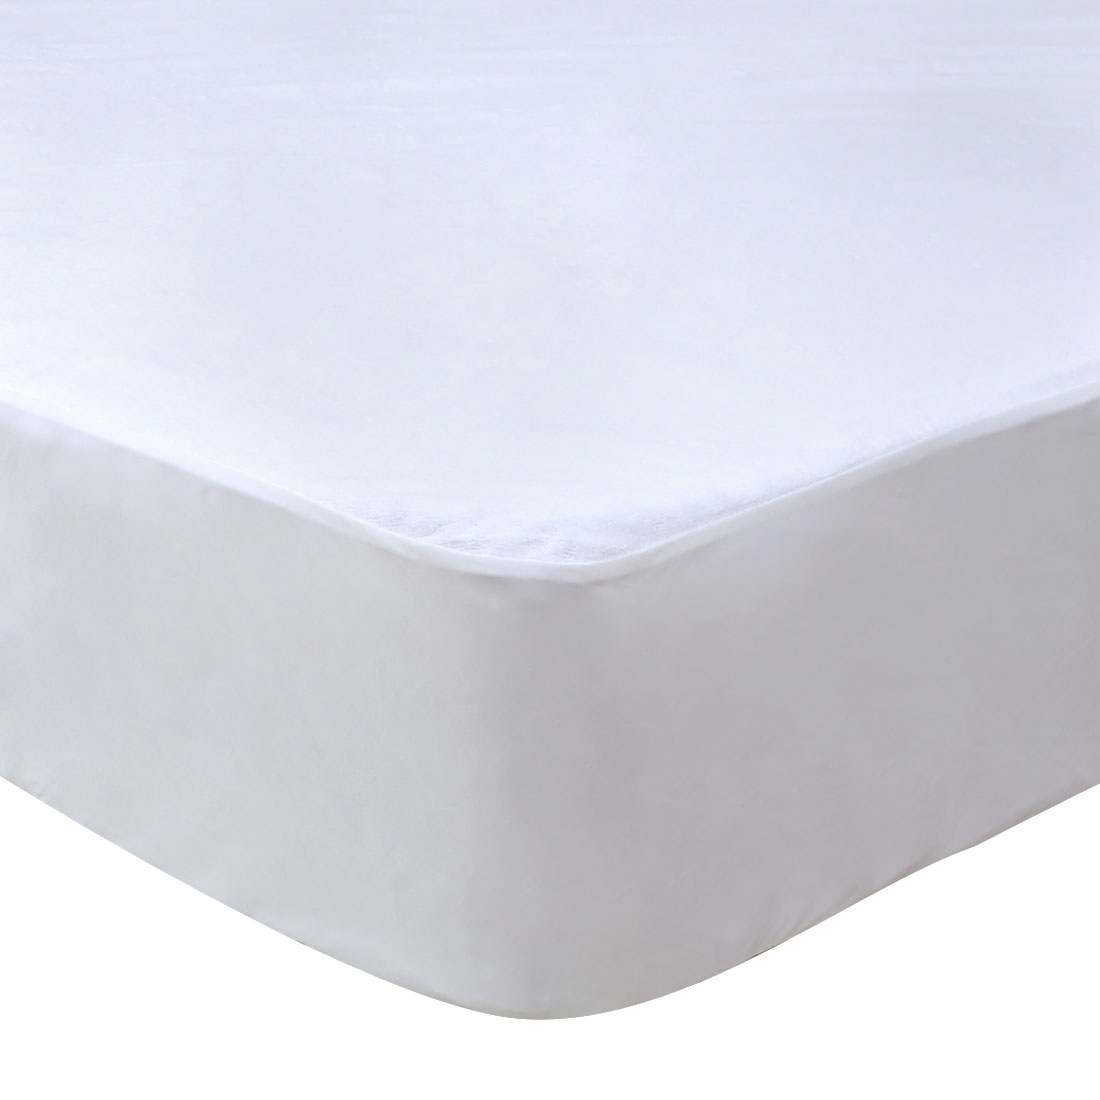 Unique Bargains Polyester Water-resistant Mattress Protector Cover Fitted Breathable Full